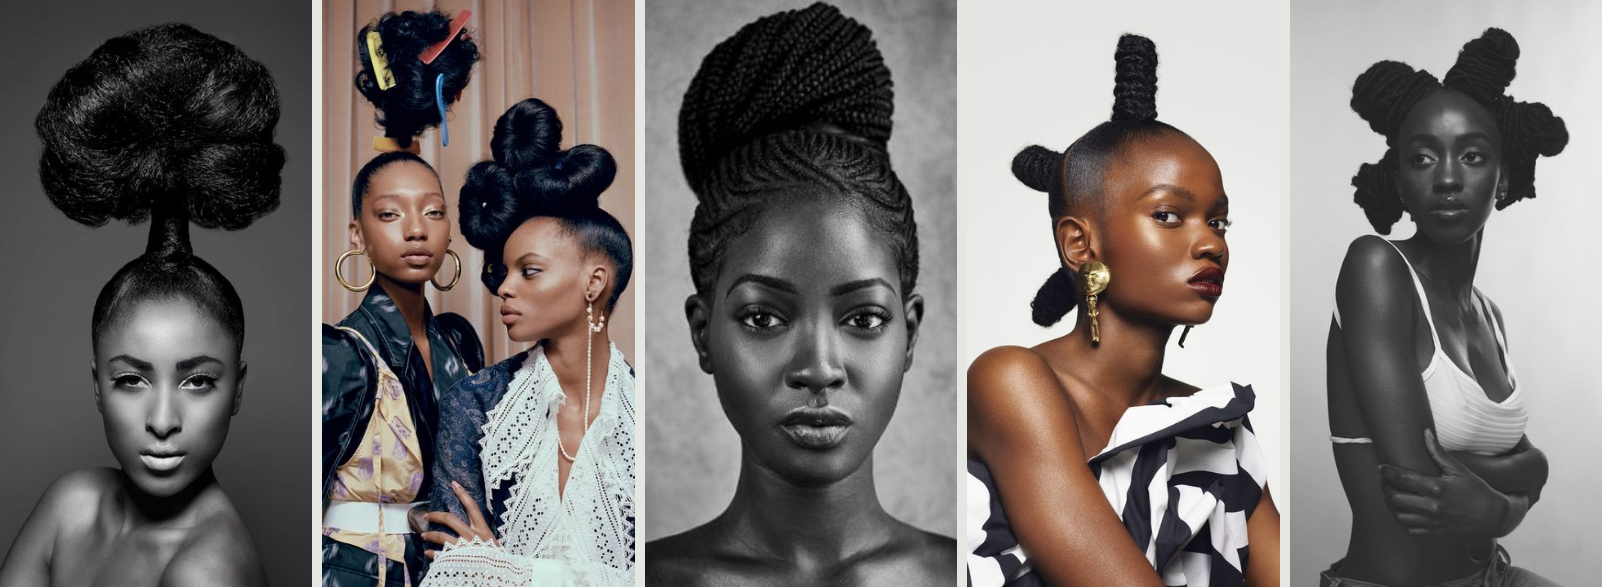 Collage of black females showing the versitility of black hair 